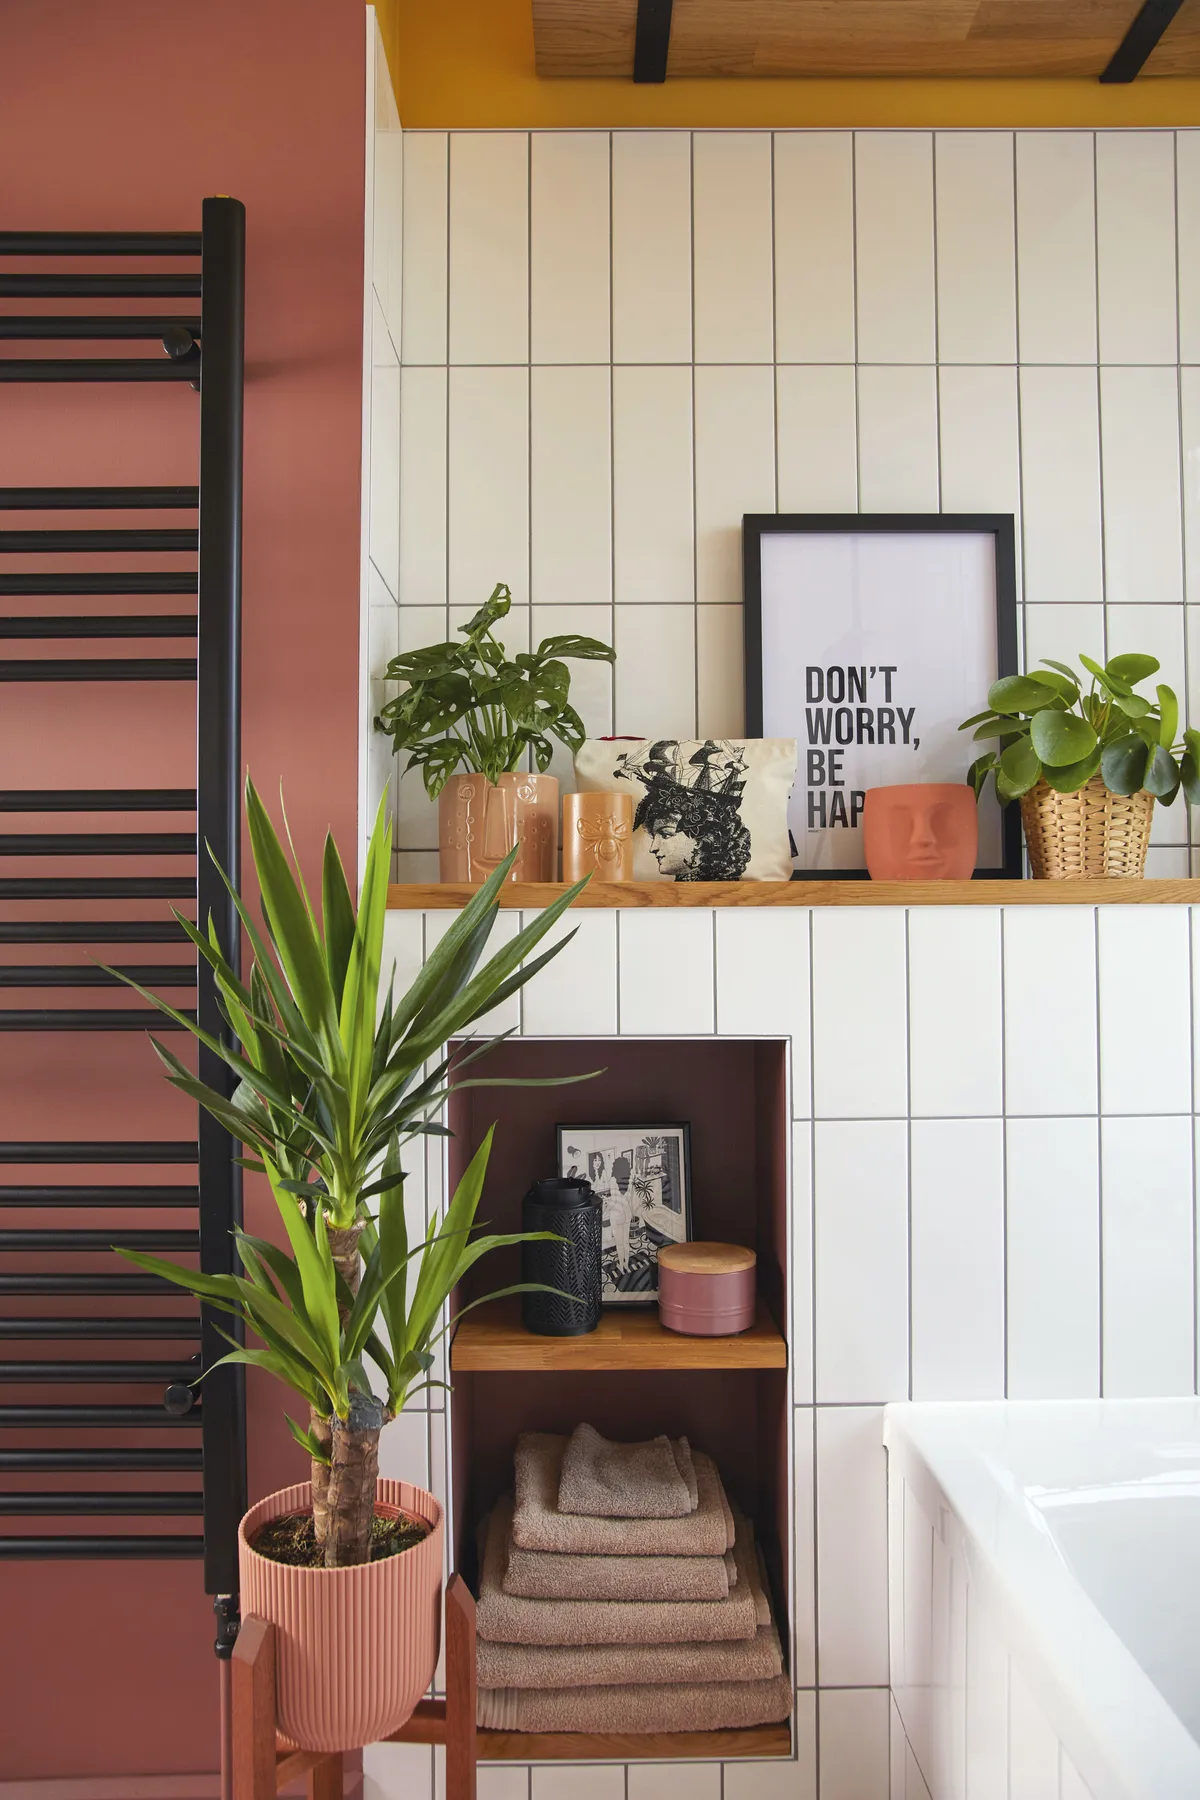 Bathroom makeover: 'It's small in size but big on ideas'